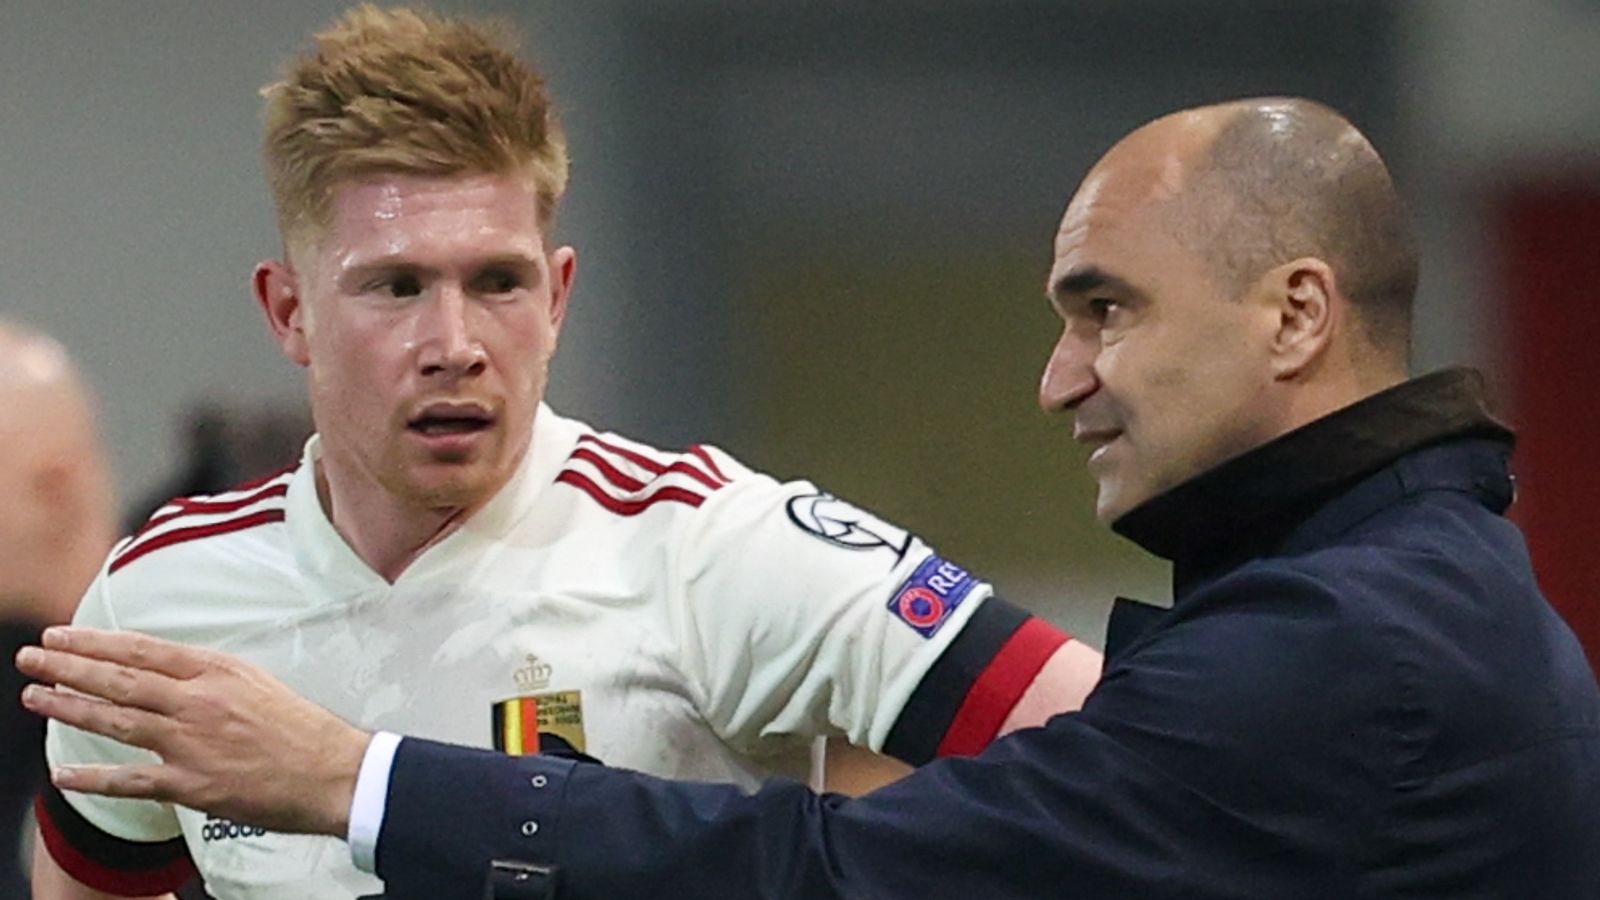 Kevin De Bruyne: Belgium midfielder to join Euro 2020 squad after surgery